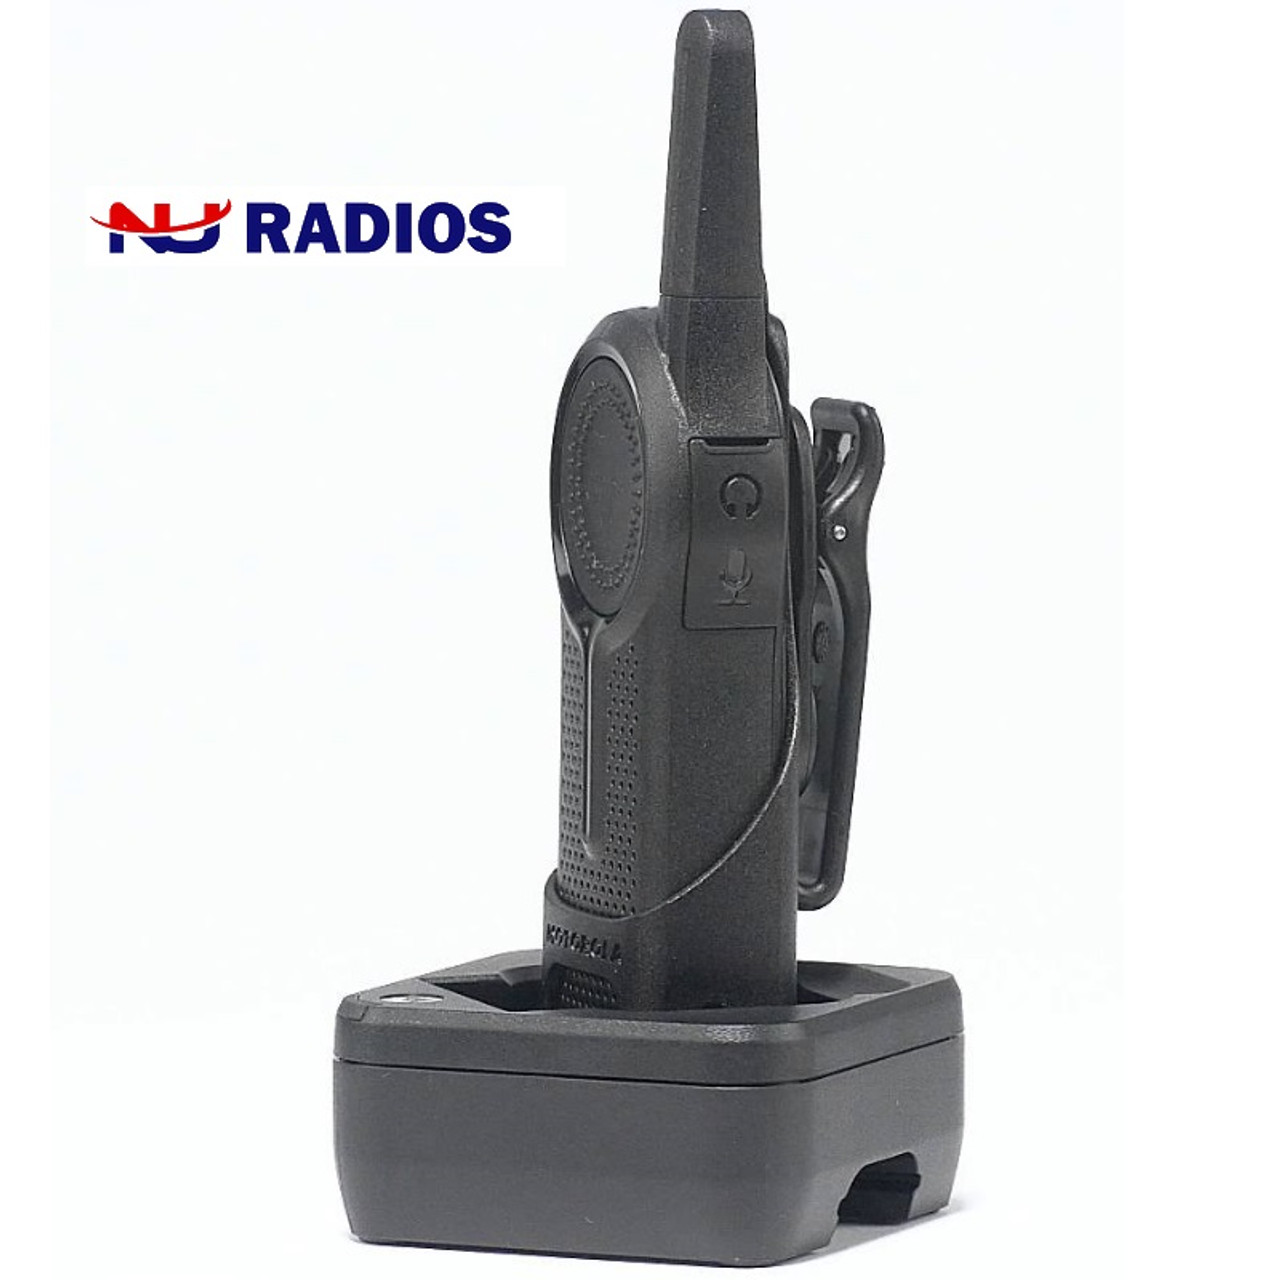 Motorola 6-Pack of DLR1020 Digital Two Way Radios for business are a  LICENSE FREE walkie talkie that includes a holster, battery and AC charger.